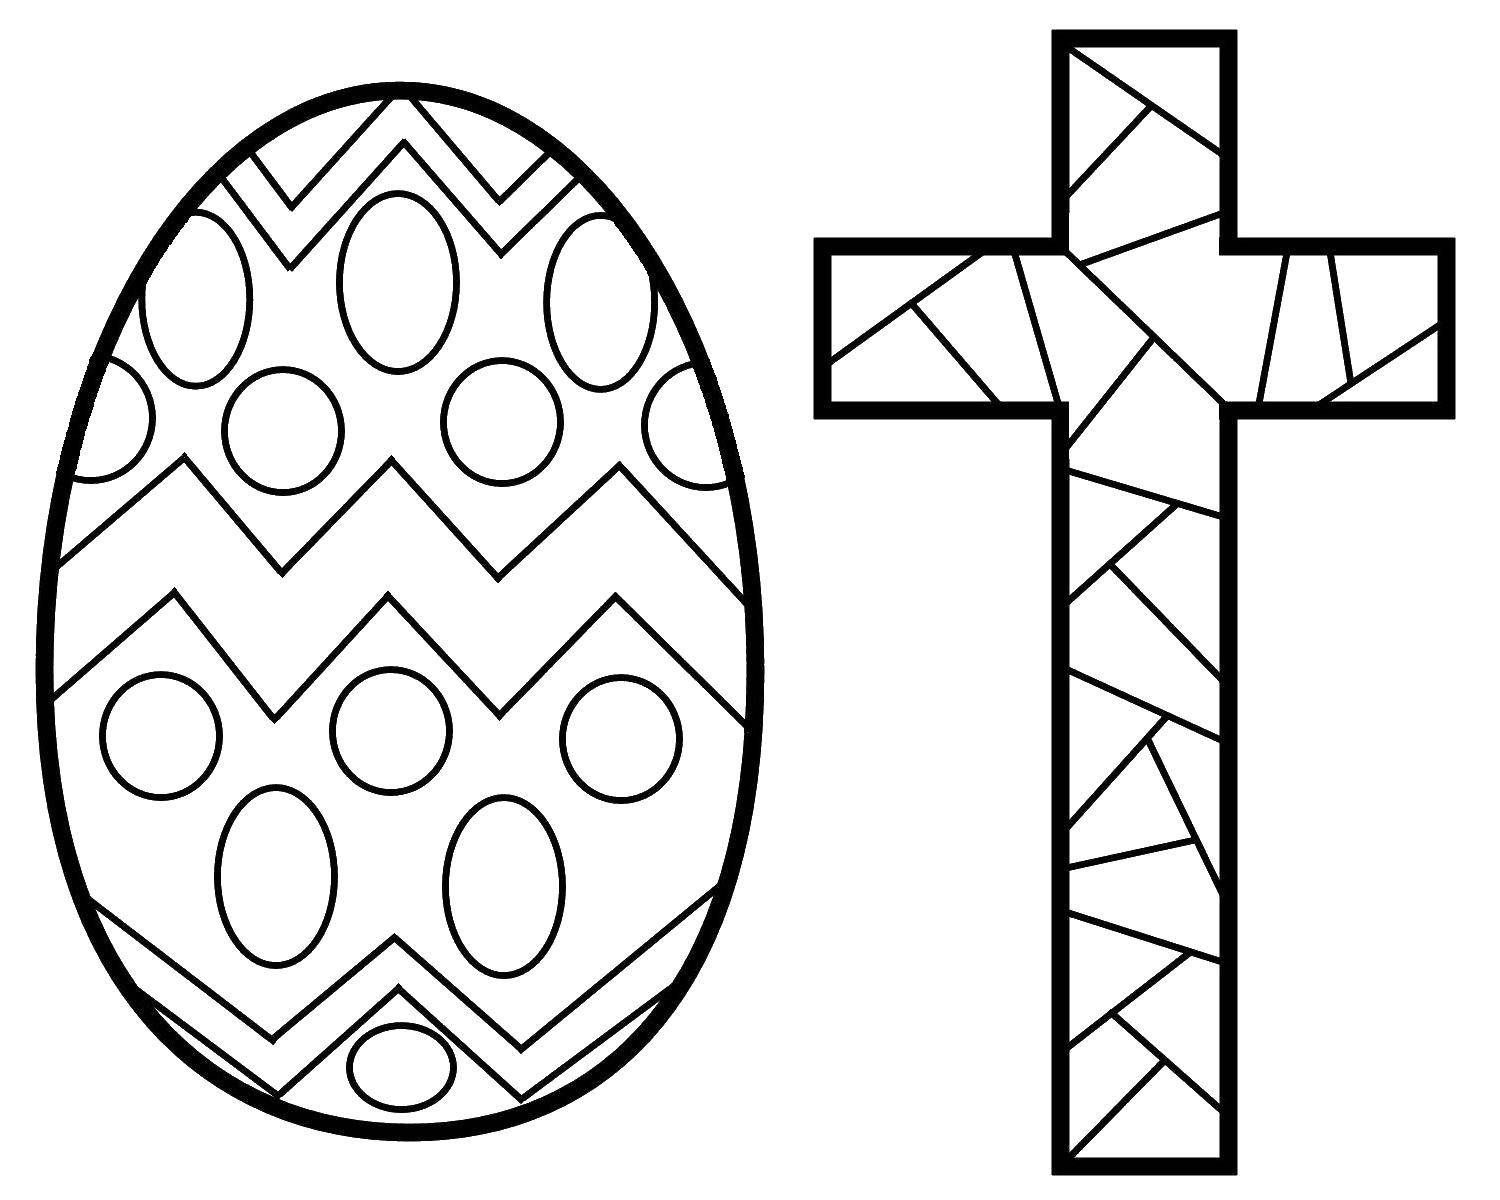 Coloring Easter. Category Easter. Tags:  Easter, holiday, egg, cross.